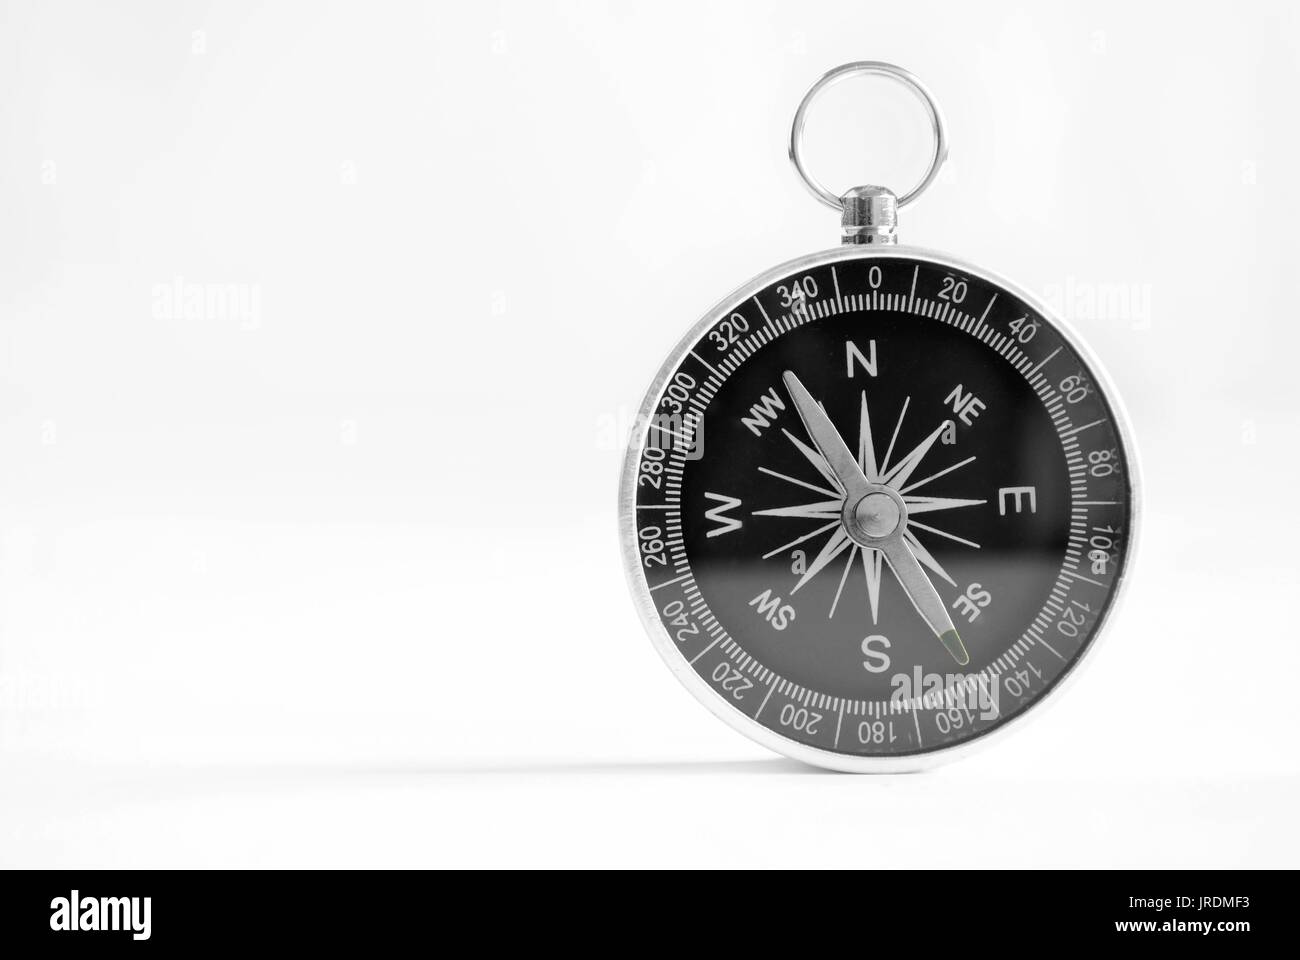 compass to determine the path and navigation. Stock Photo